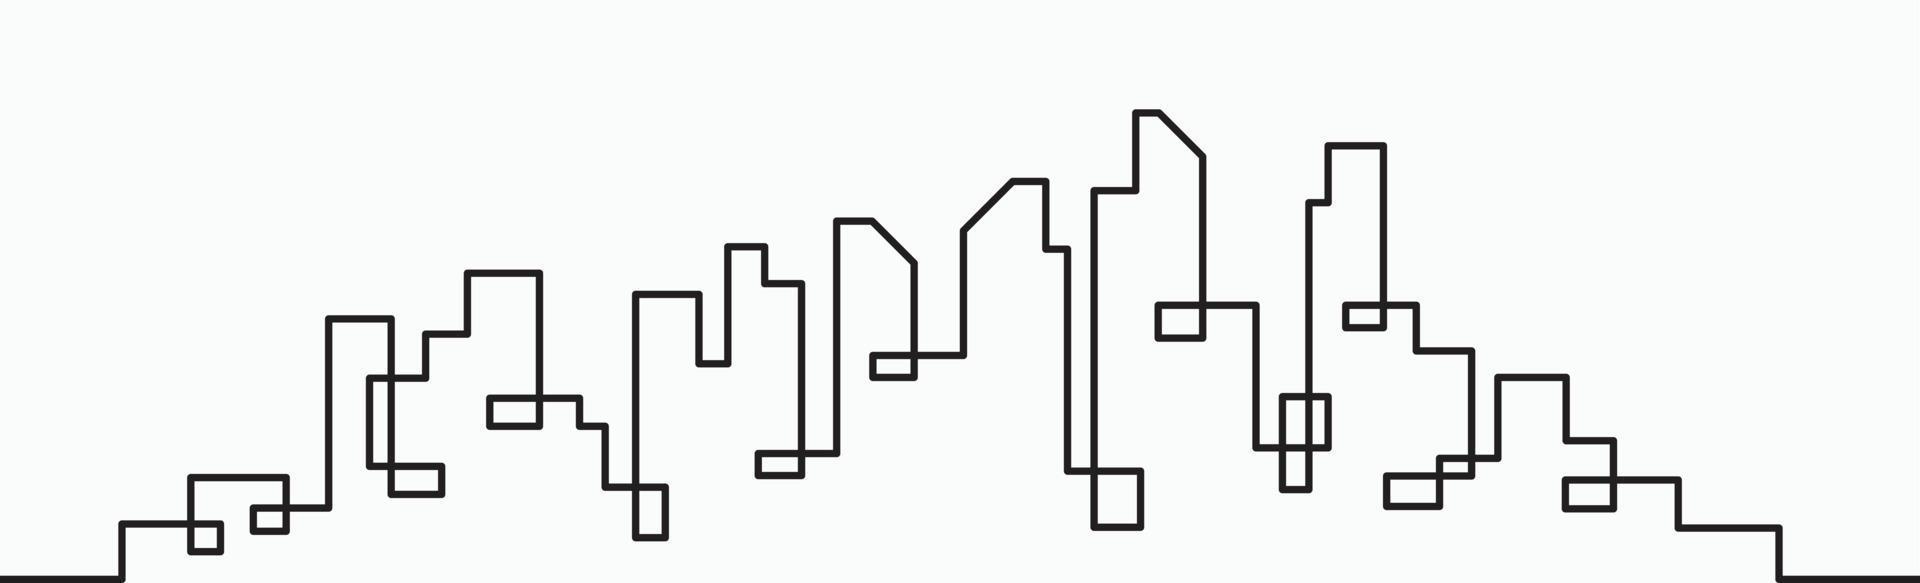 Modern City Skyline continuous outline drawing on white background. vector